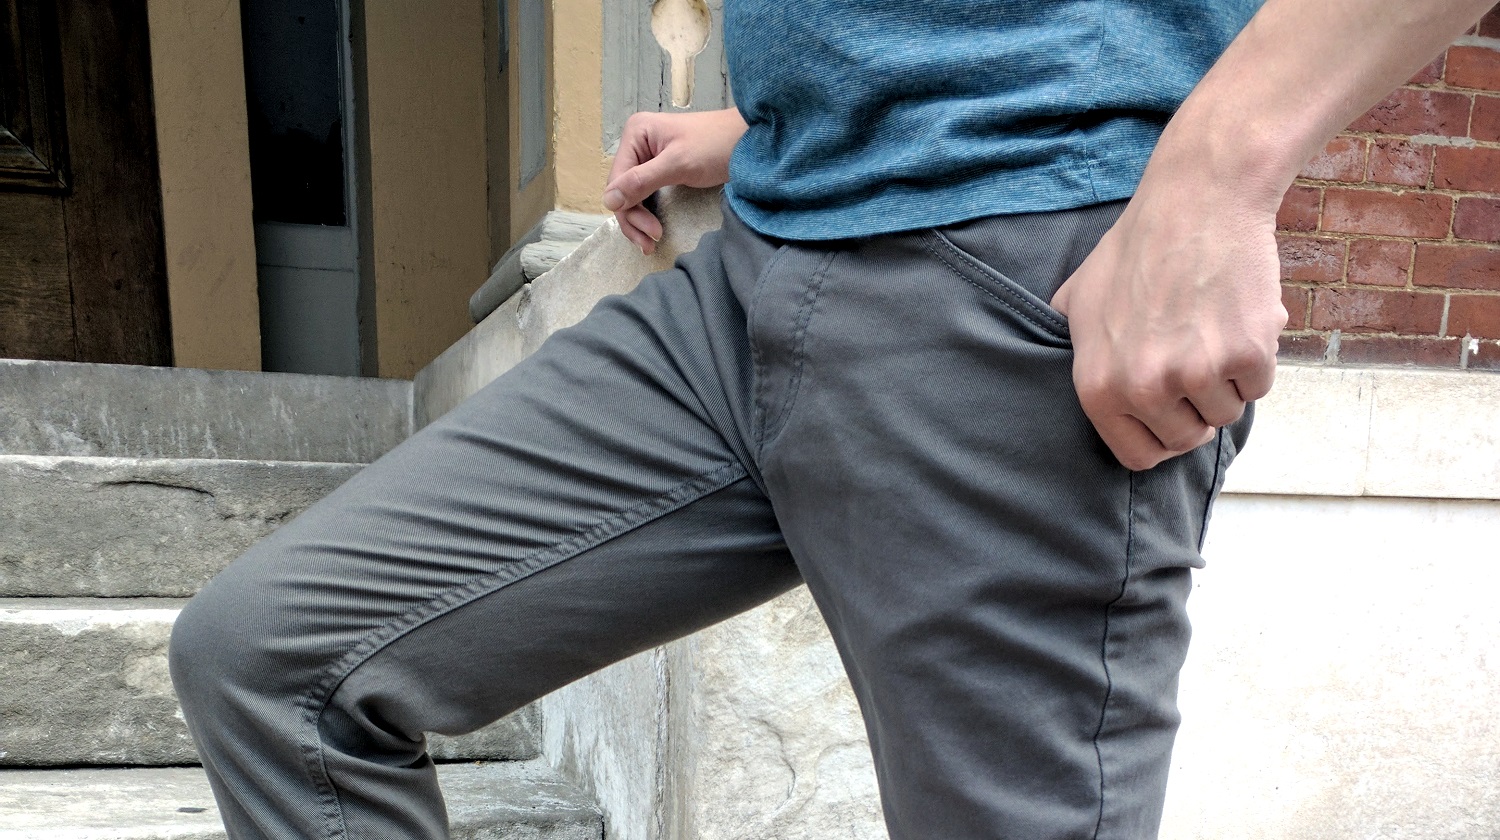 In Review: Old Navy All-Temp Twill Five-Pocket Pants